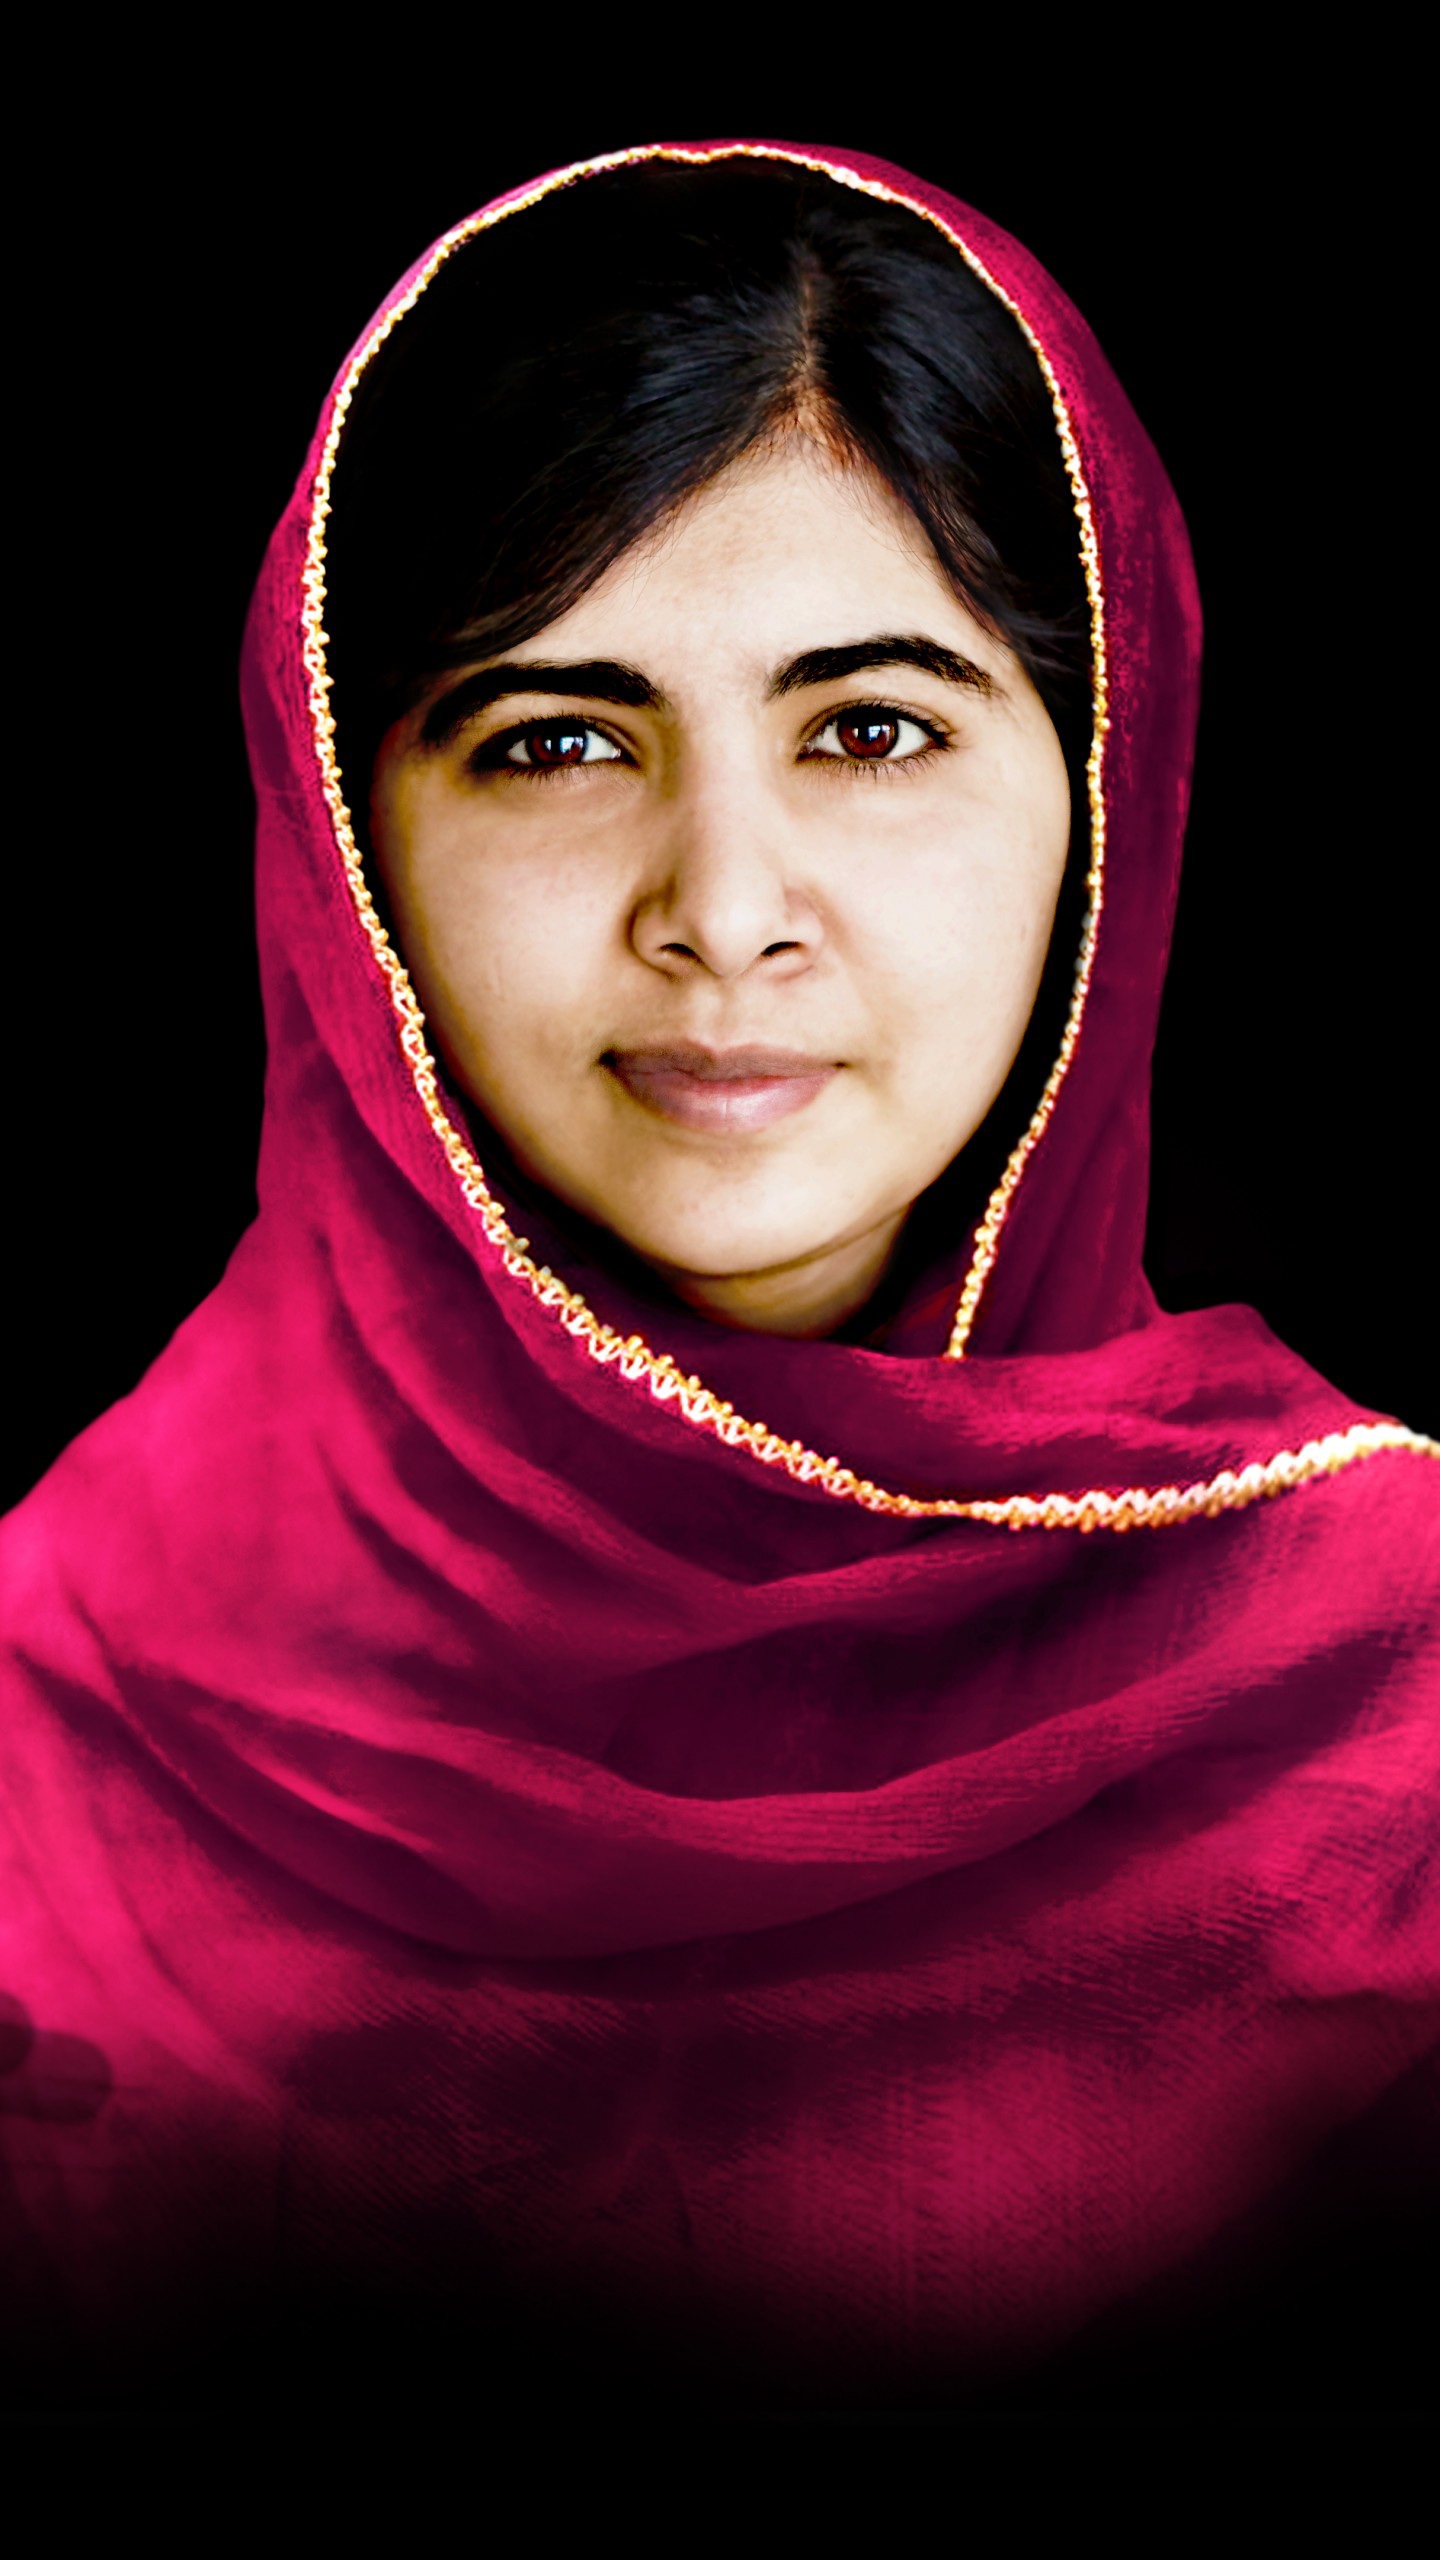 this post is all about Malala yousafzai the icon of girl education